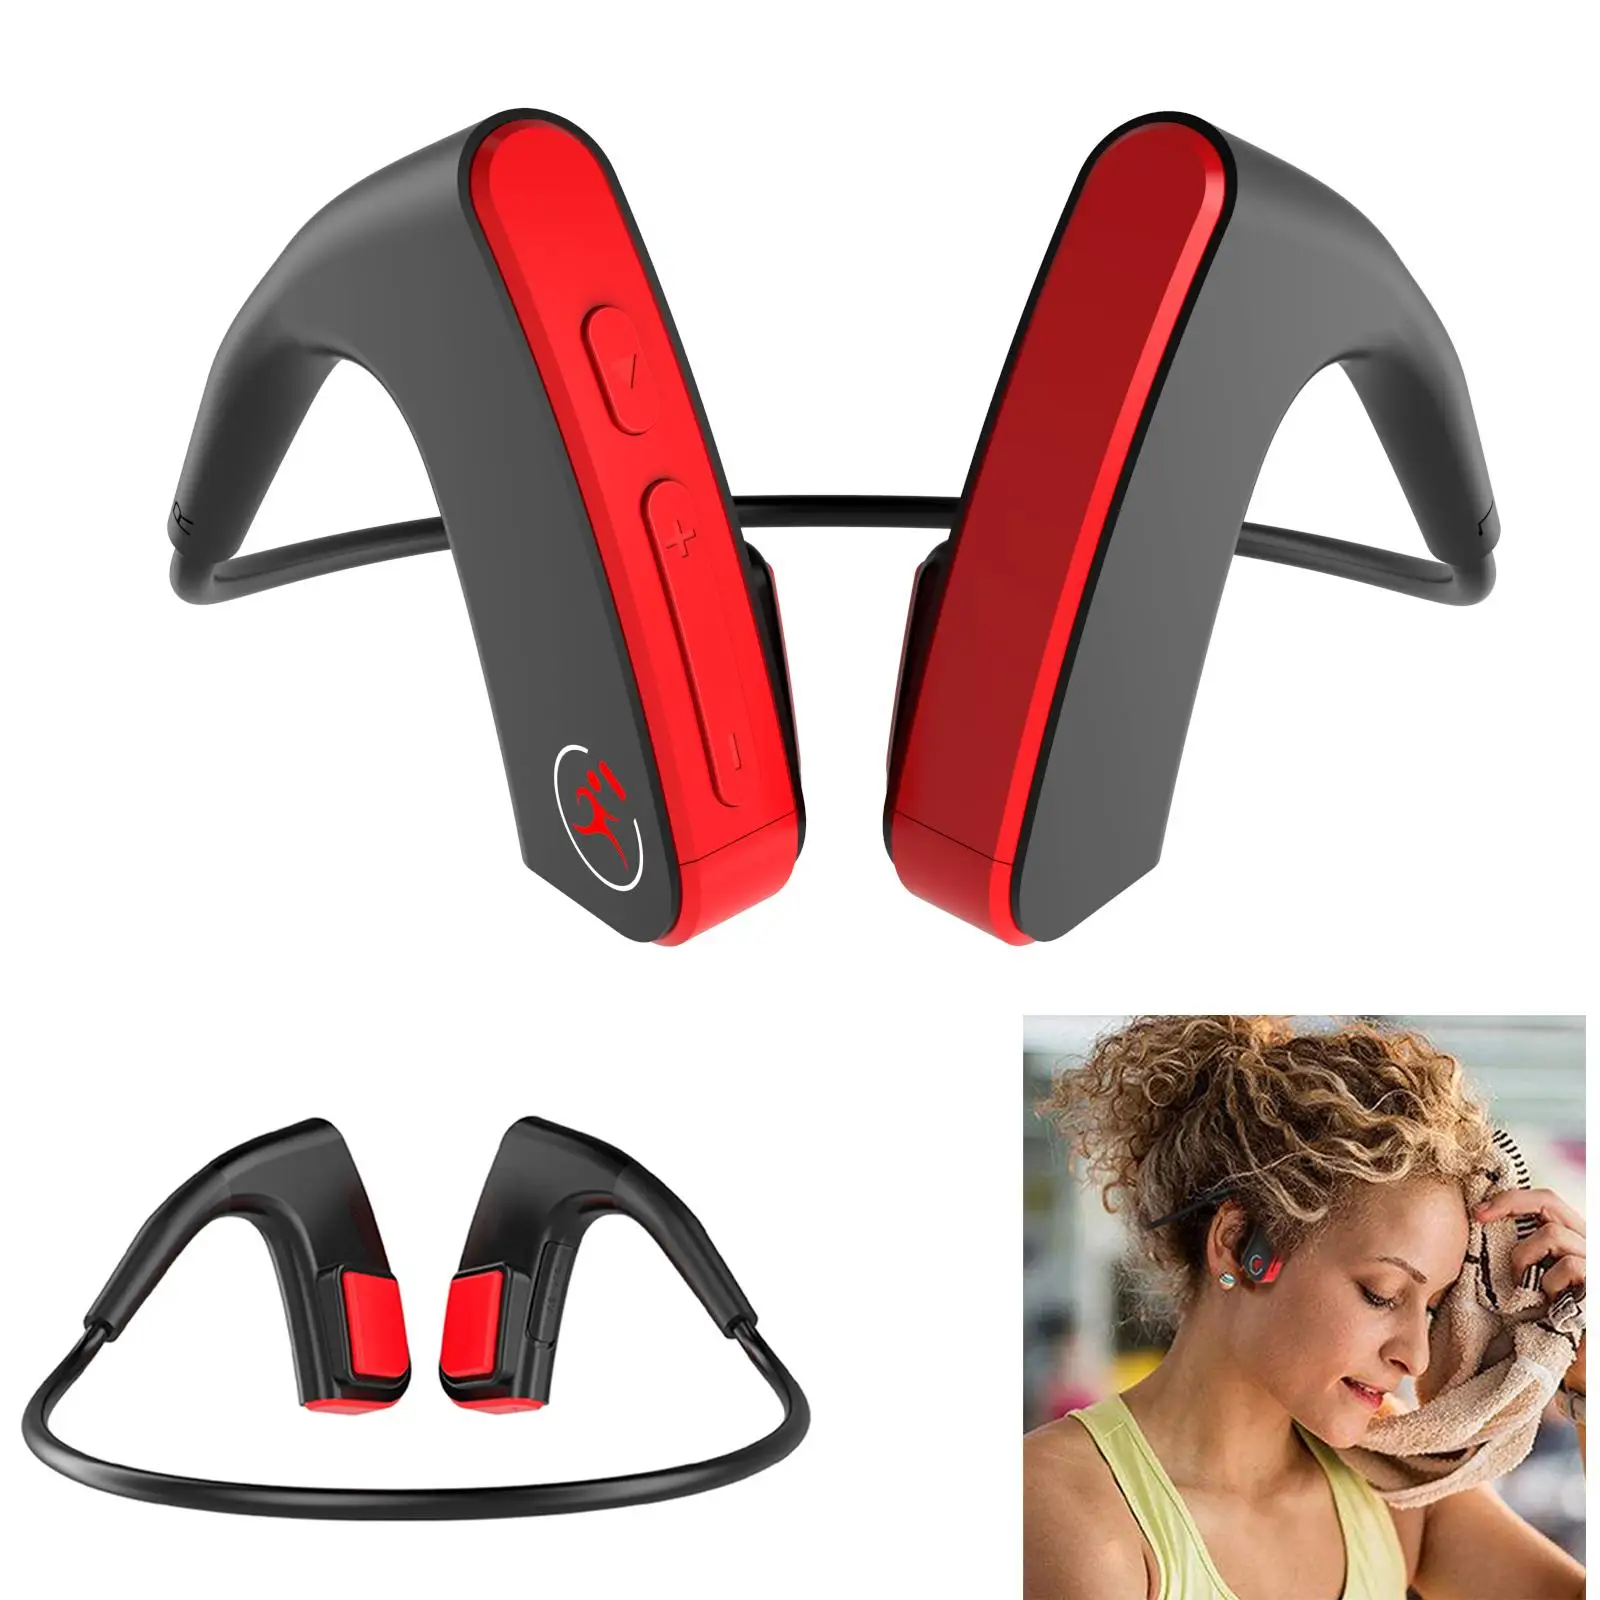 

Bone Conduction Wireless Headphones Headsets Earphones Handsfree Calling with Mic for IOS Android Cell Phones